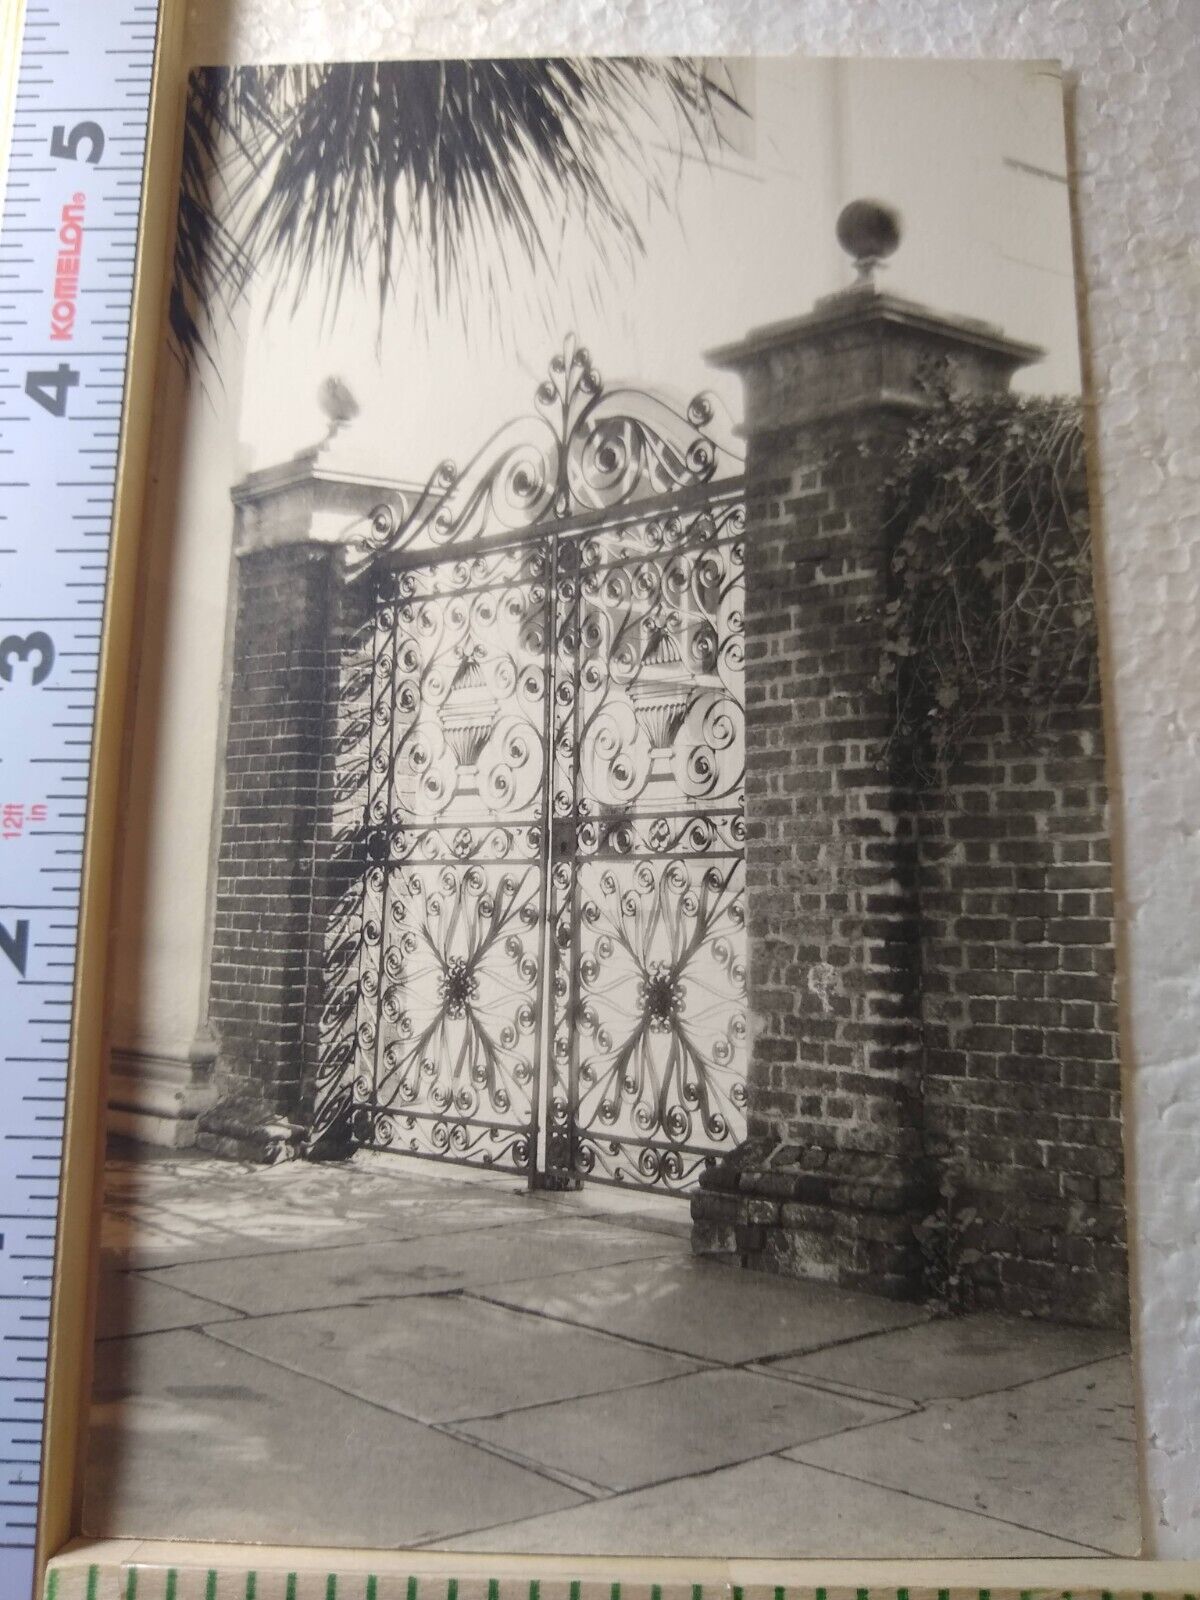 Postcard Vintage Photo of a Gate with Intricate Design